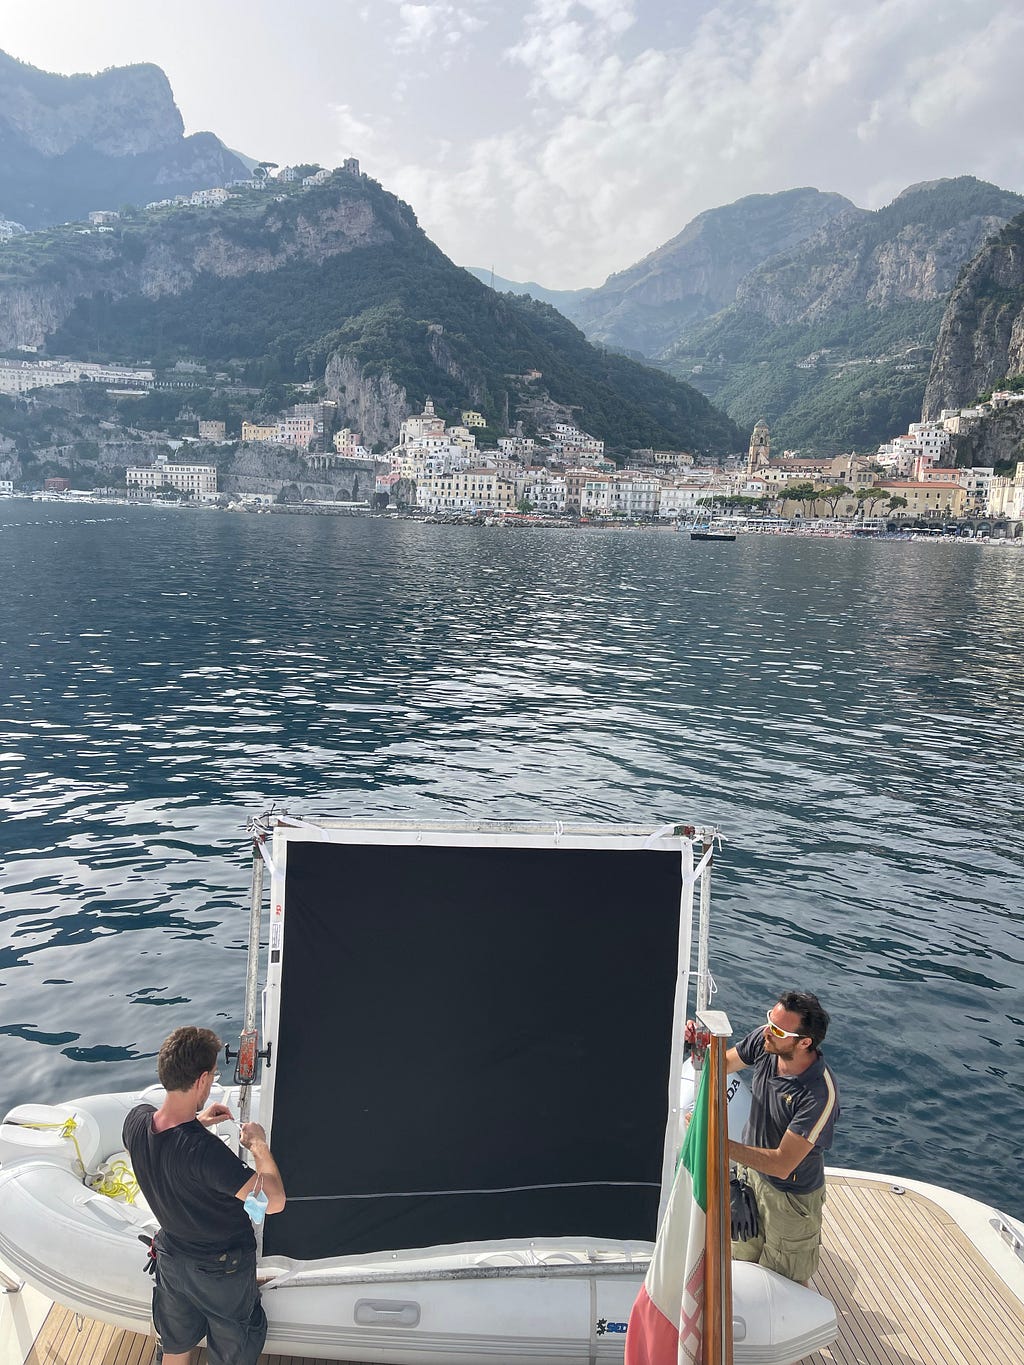 Maritime Video Production in Italy